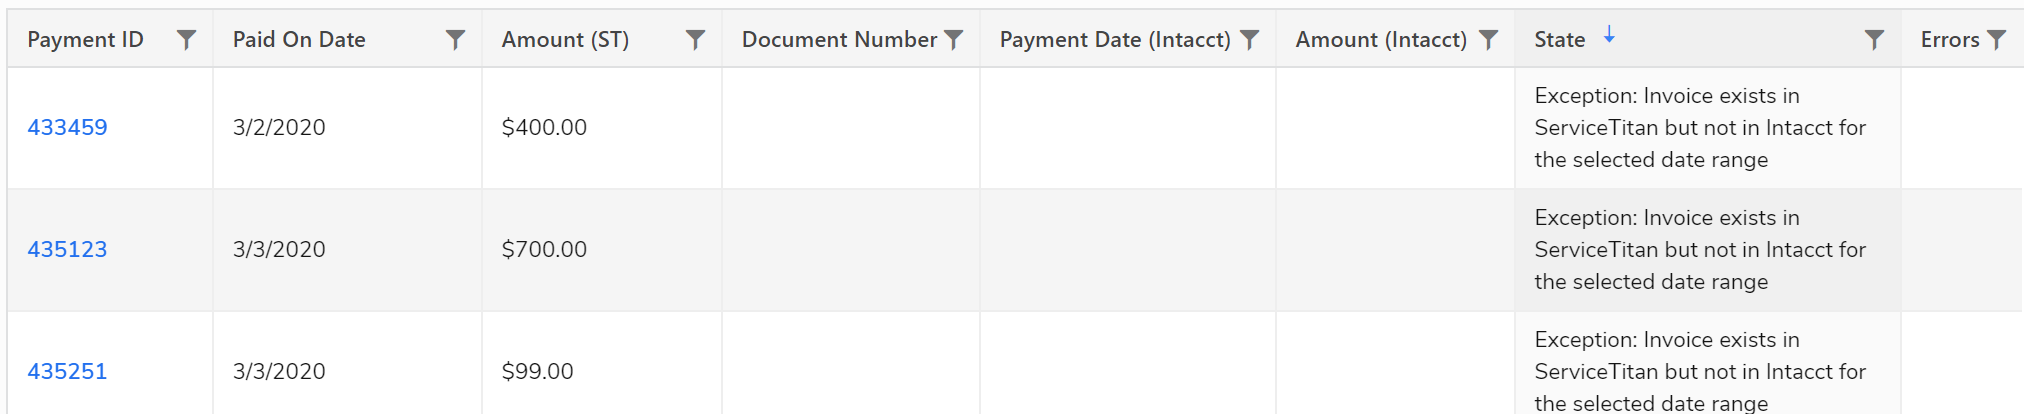 intacct-report-results-payments.png